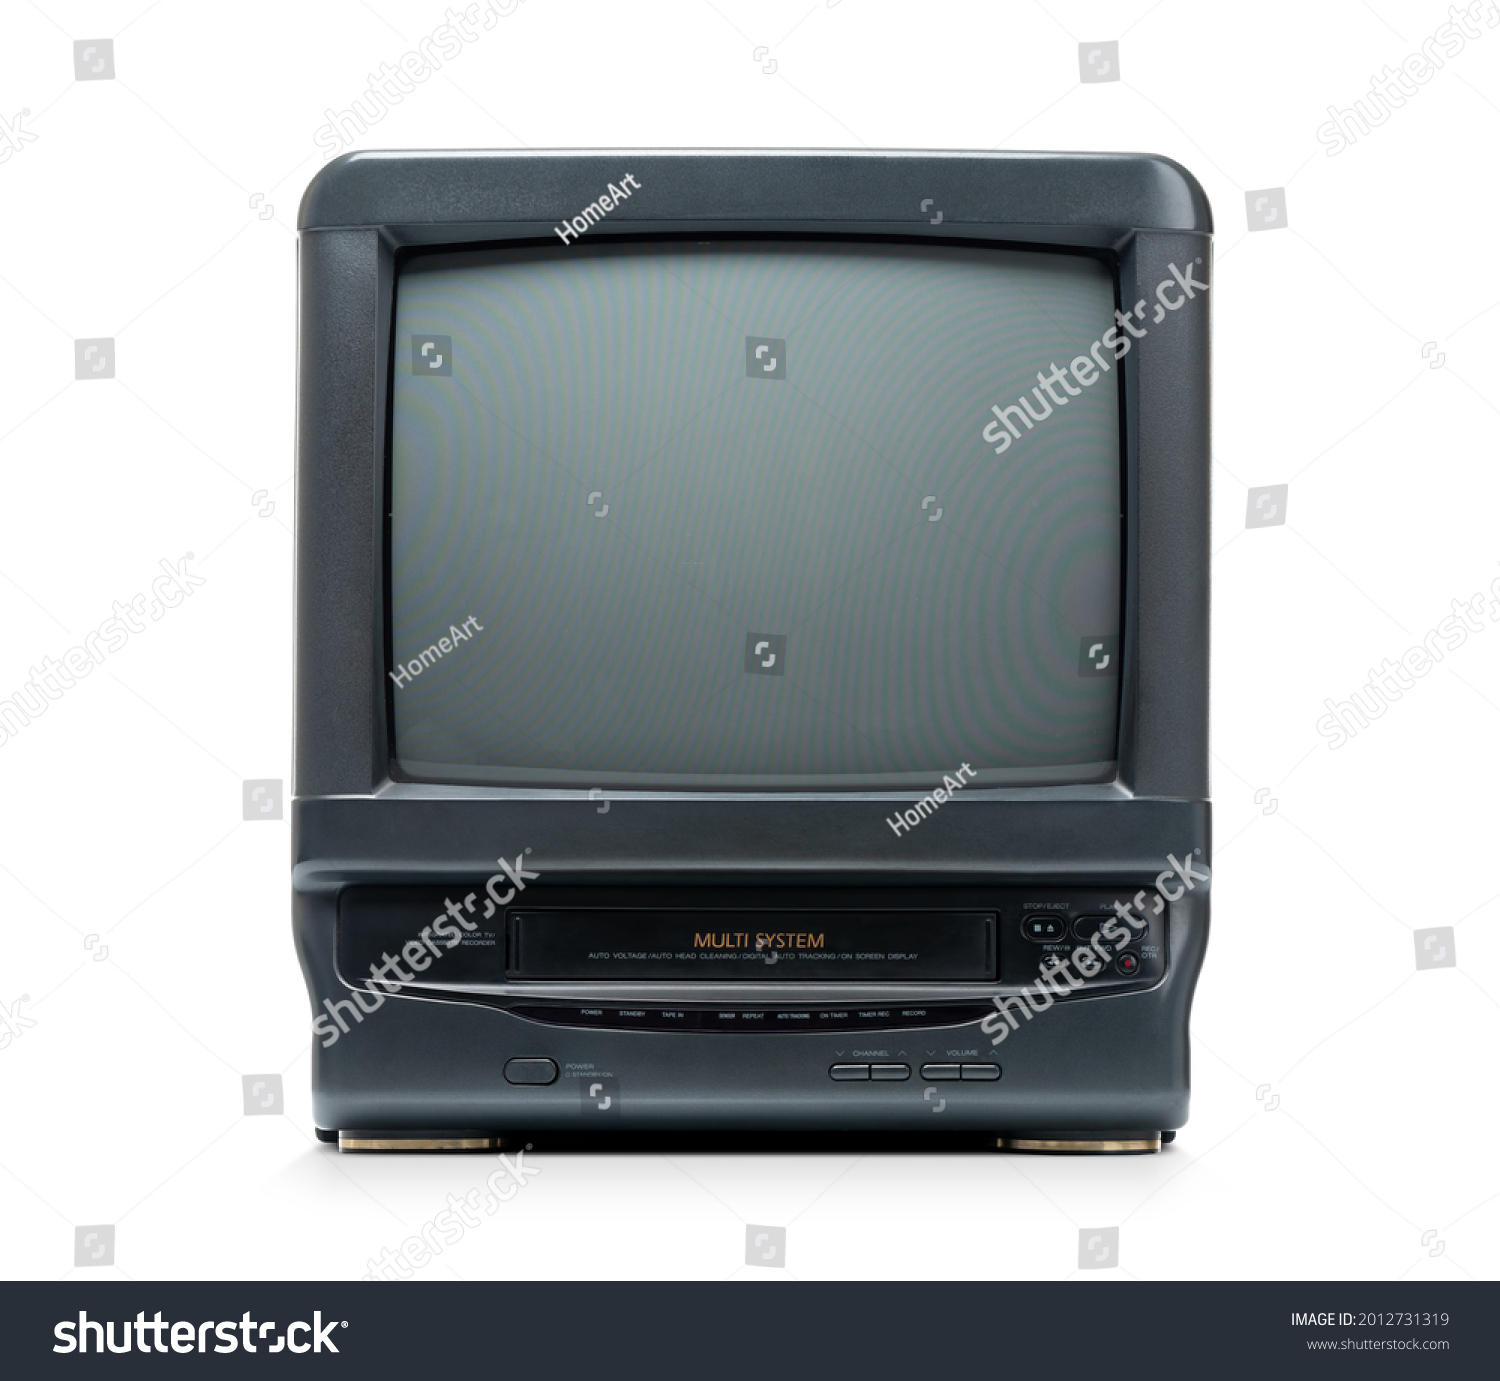 Old CRT TV VCR combined in one unit isolated on white background. File contains a path to isolation. #2012731319